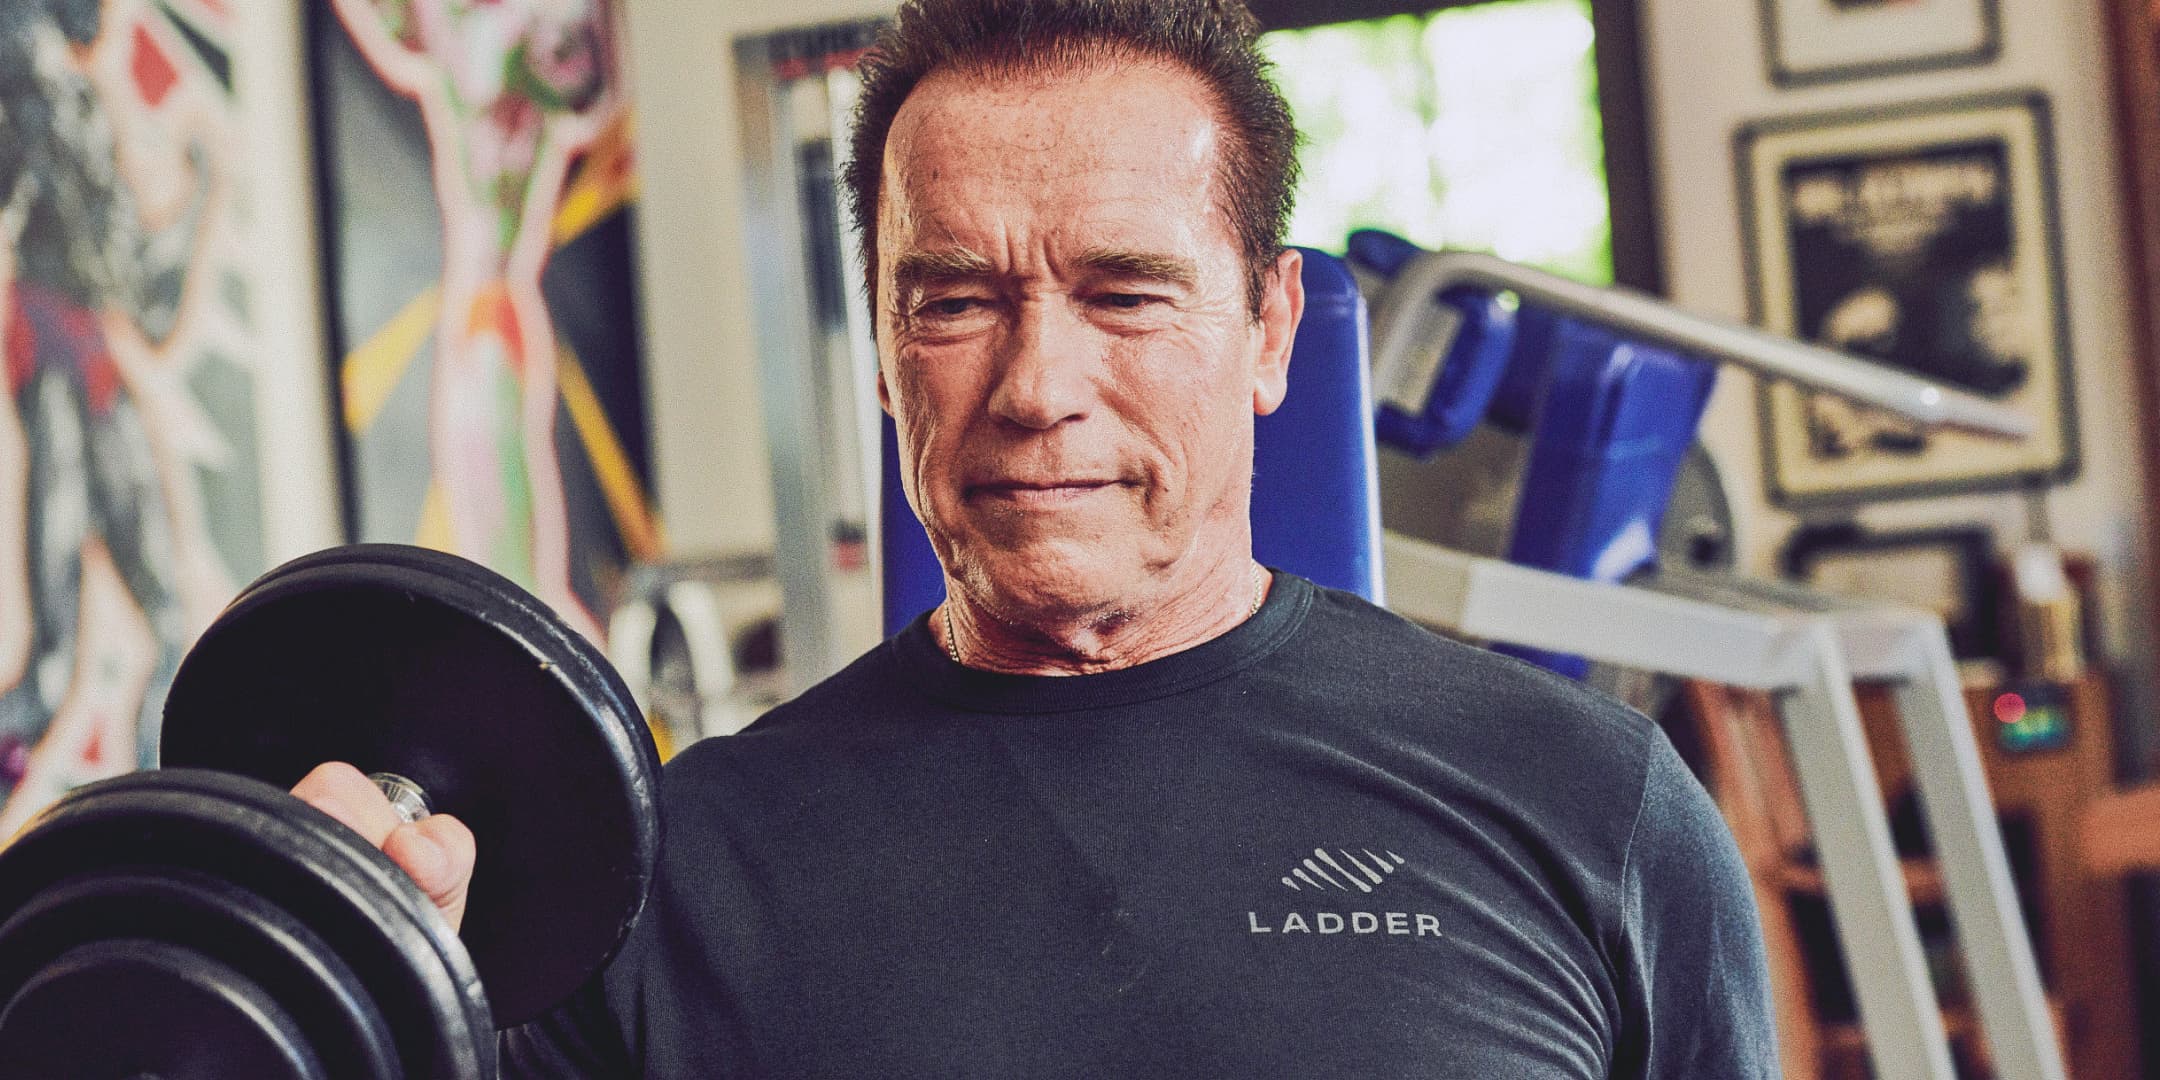 What Is Arnold Schwarzenegger's Arm Workout to Get Big and Strong